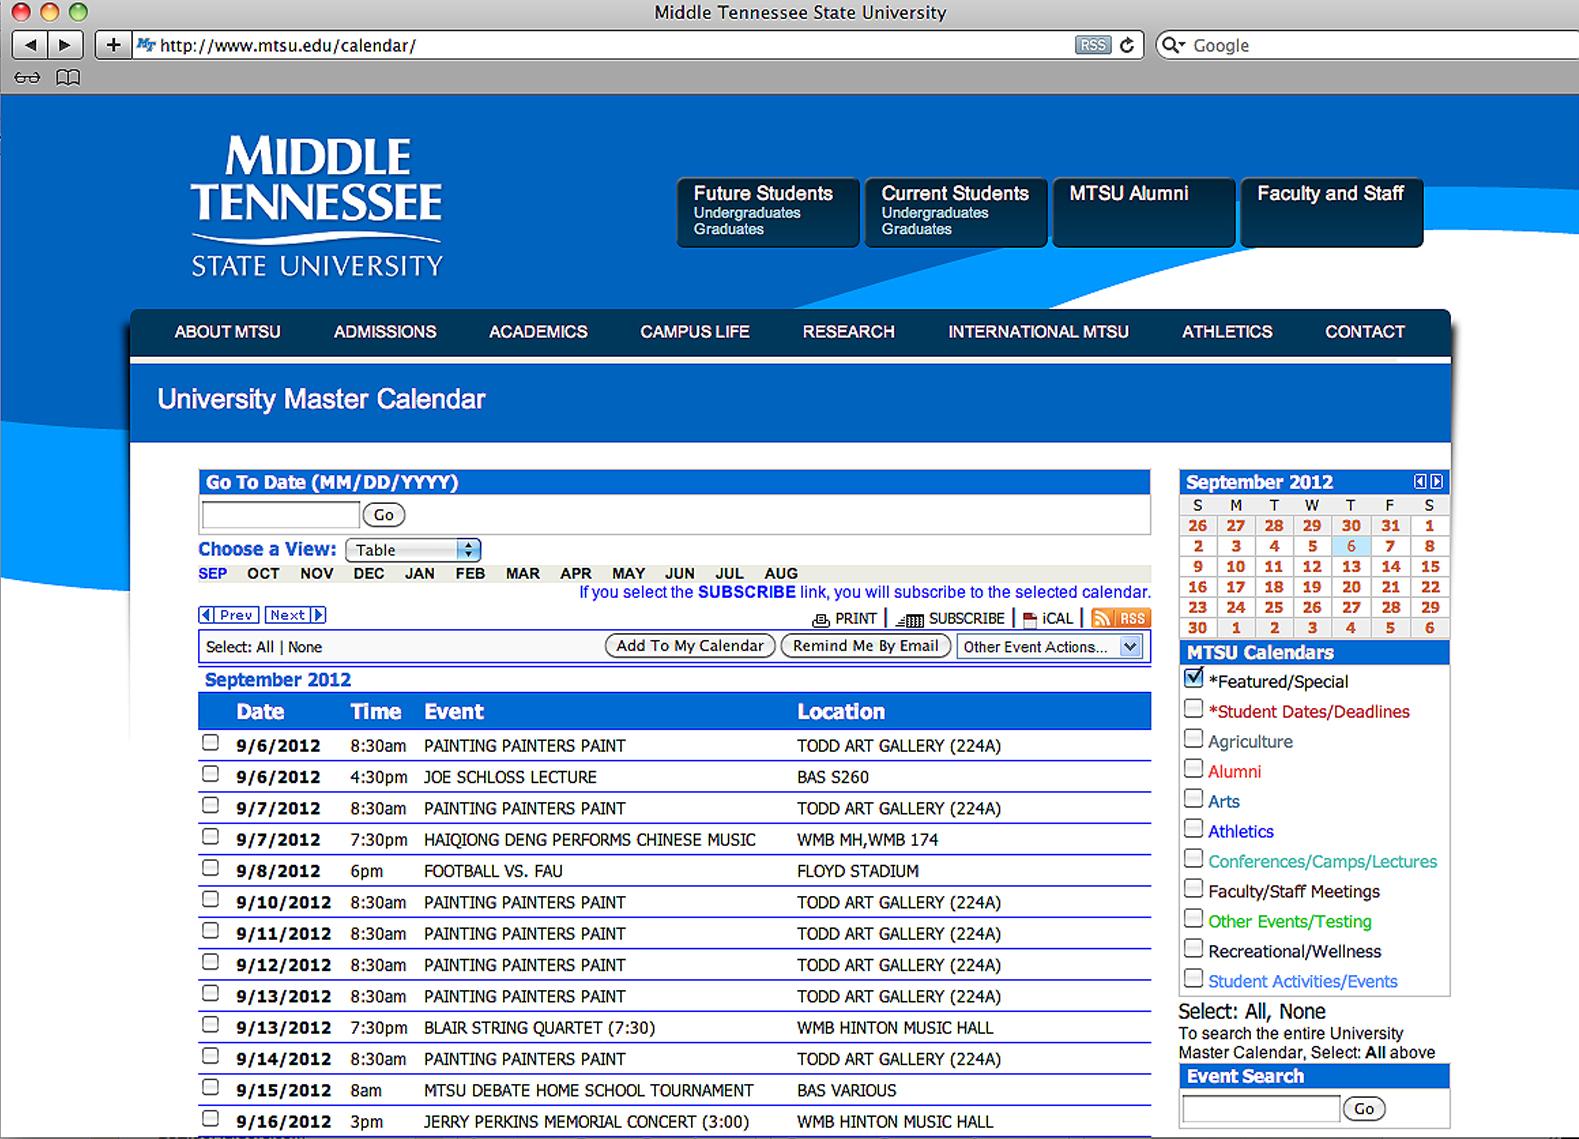 MTSU’s New Online Master Calendar Helps Users Find Events and Deadlines